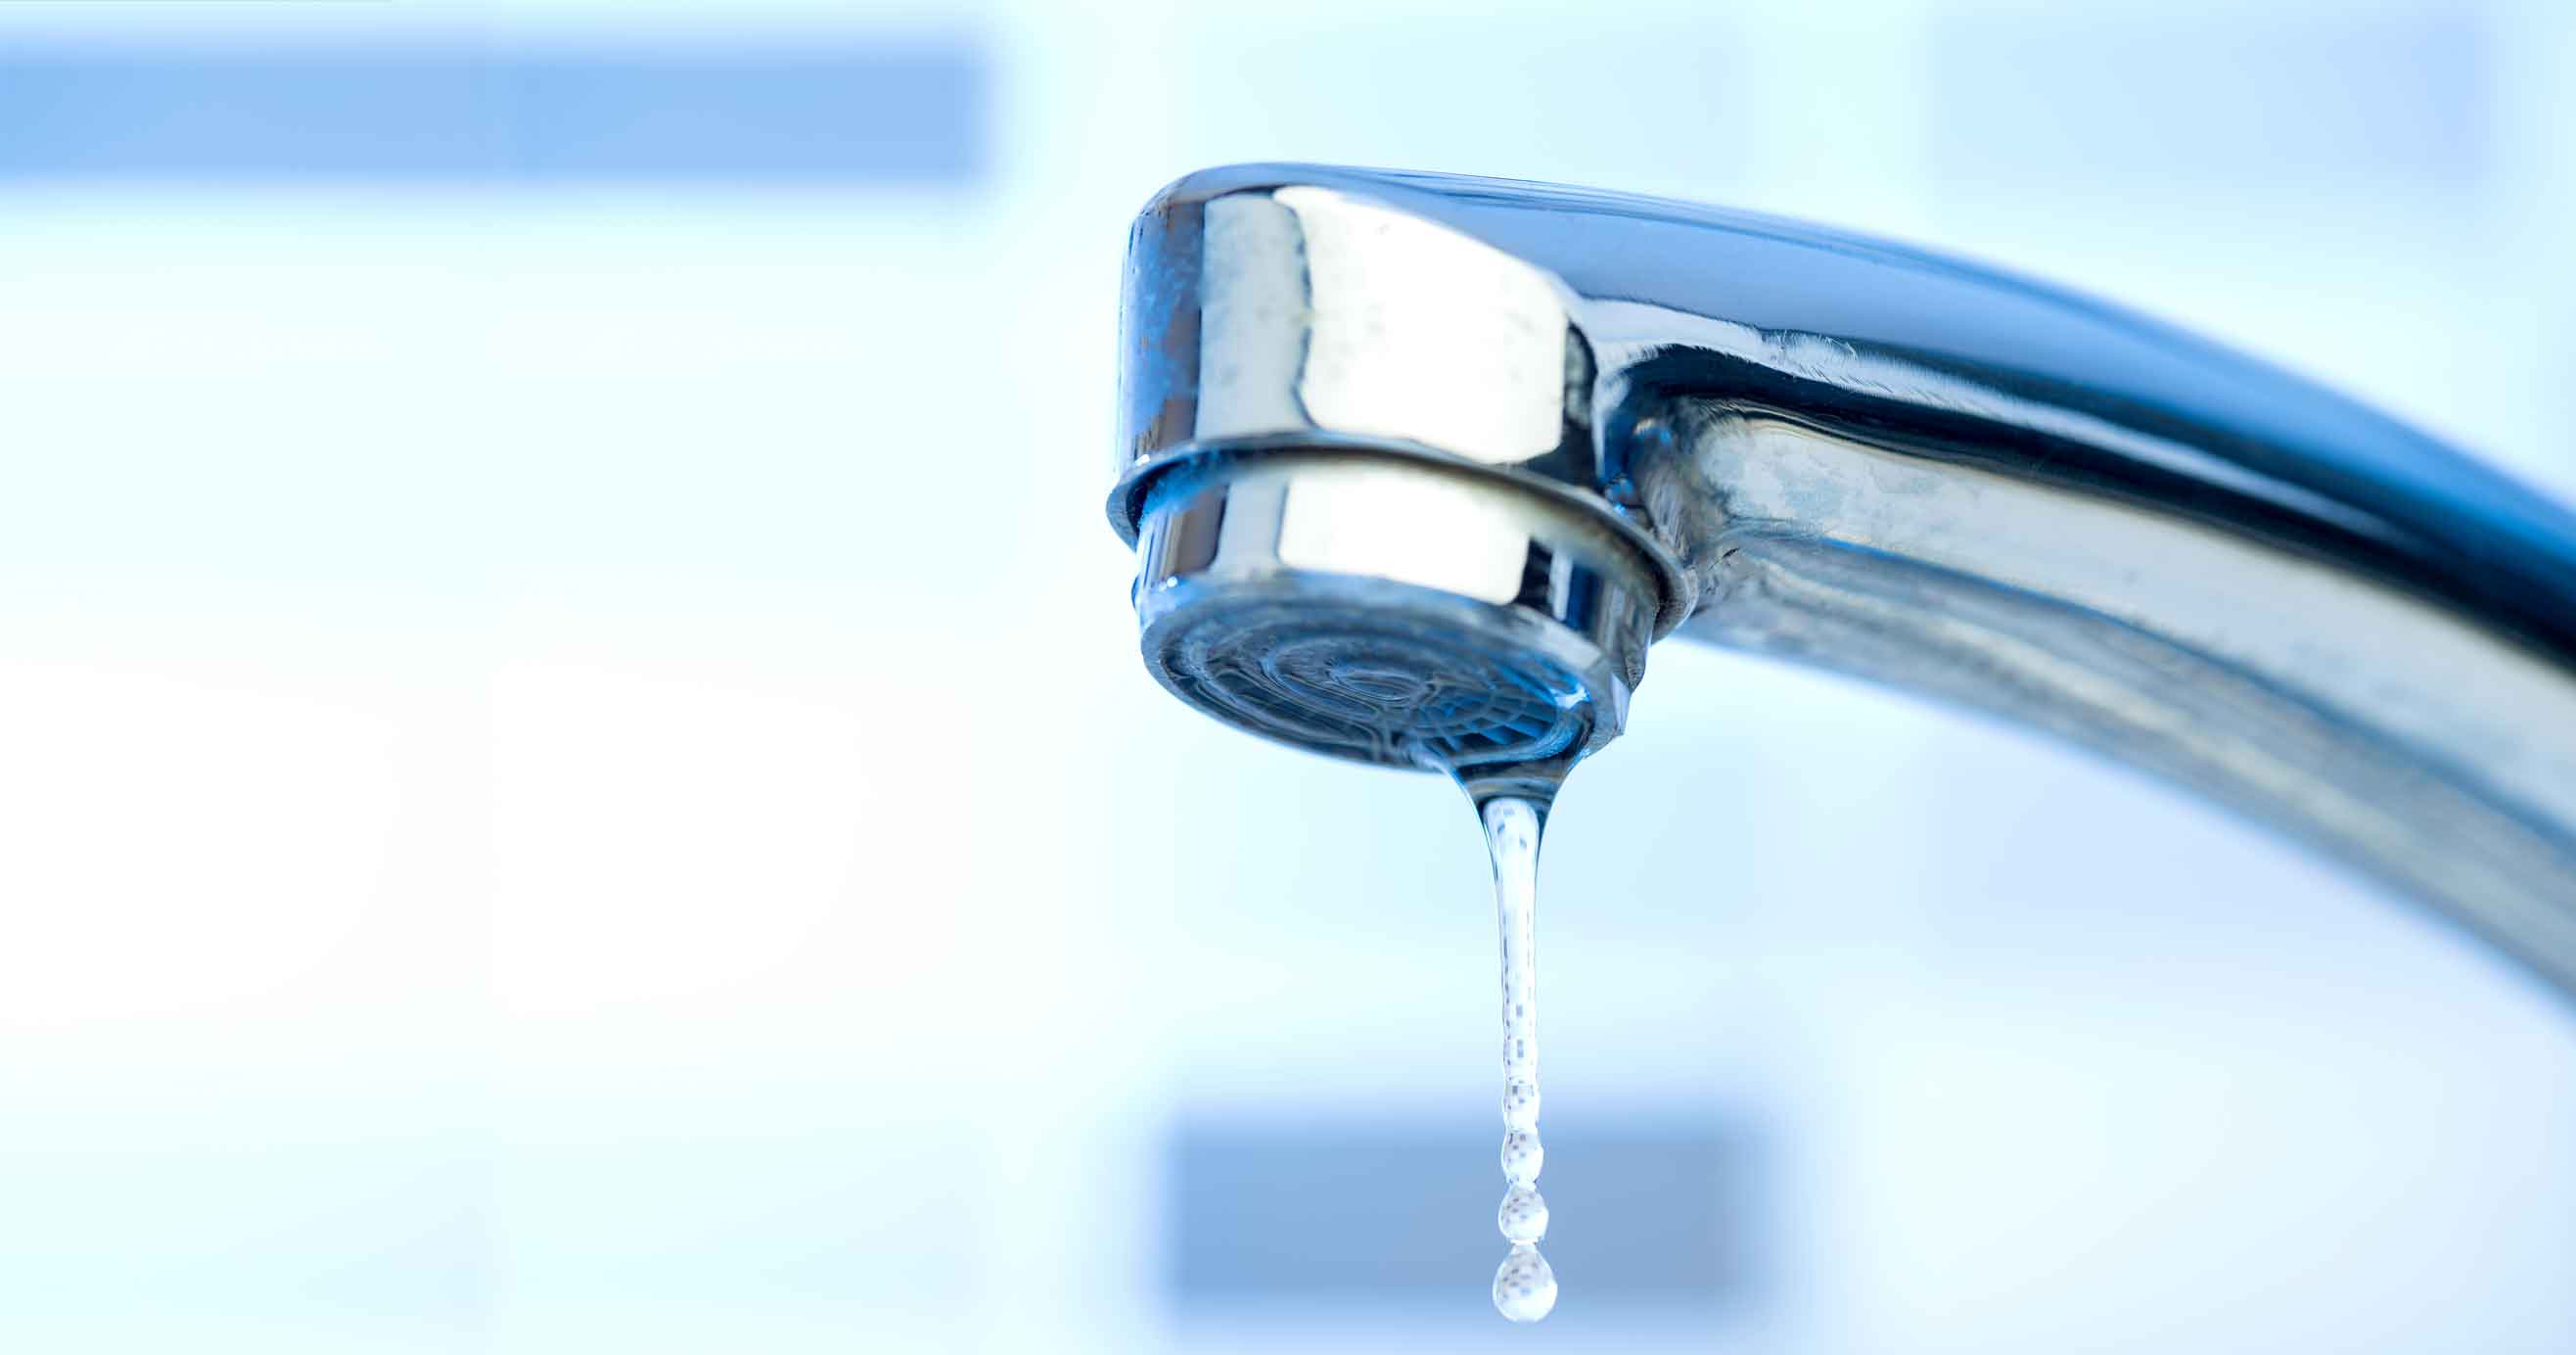 Tips for fixing Leaky Faucets | HomeServe